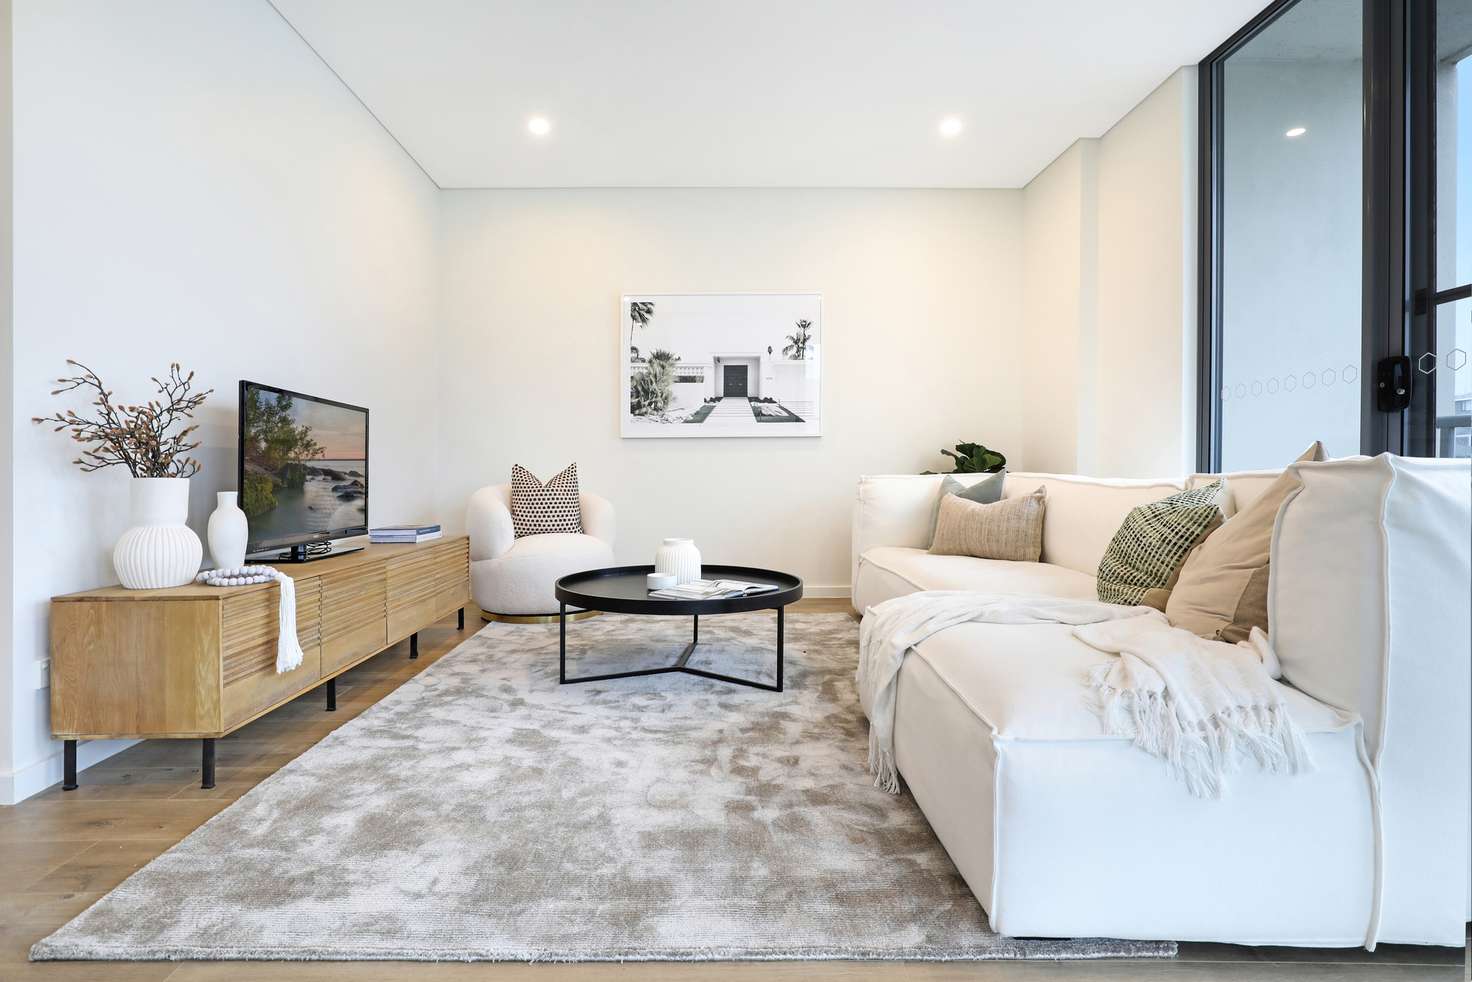 Main view of Homely apartment listing, 47/11 Atchison Street, Wollongong NSW 2500